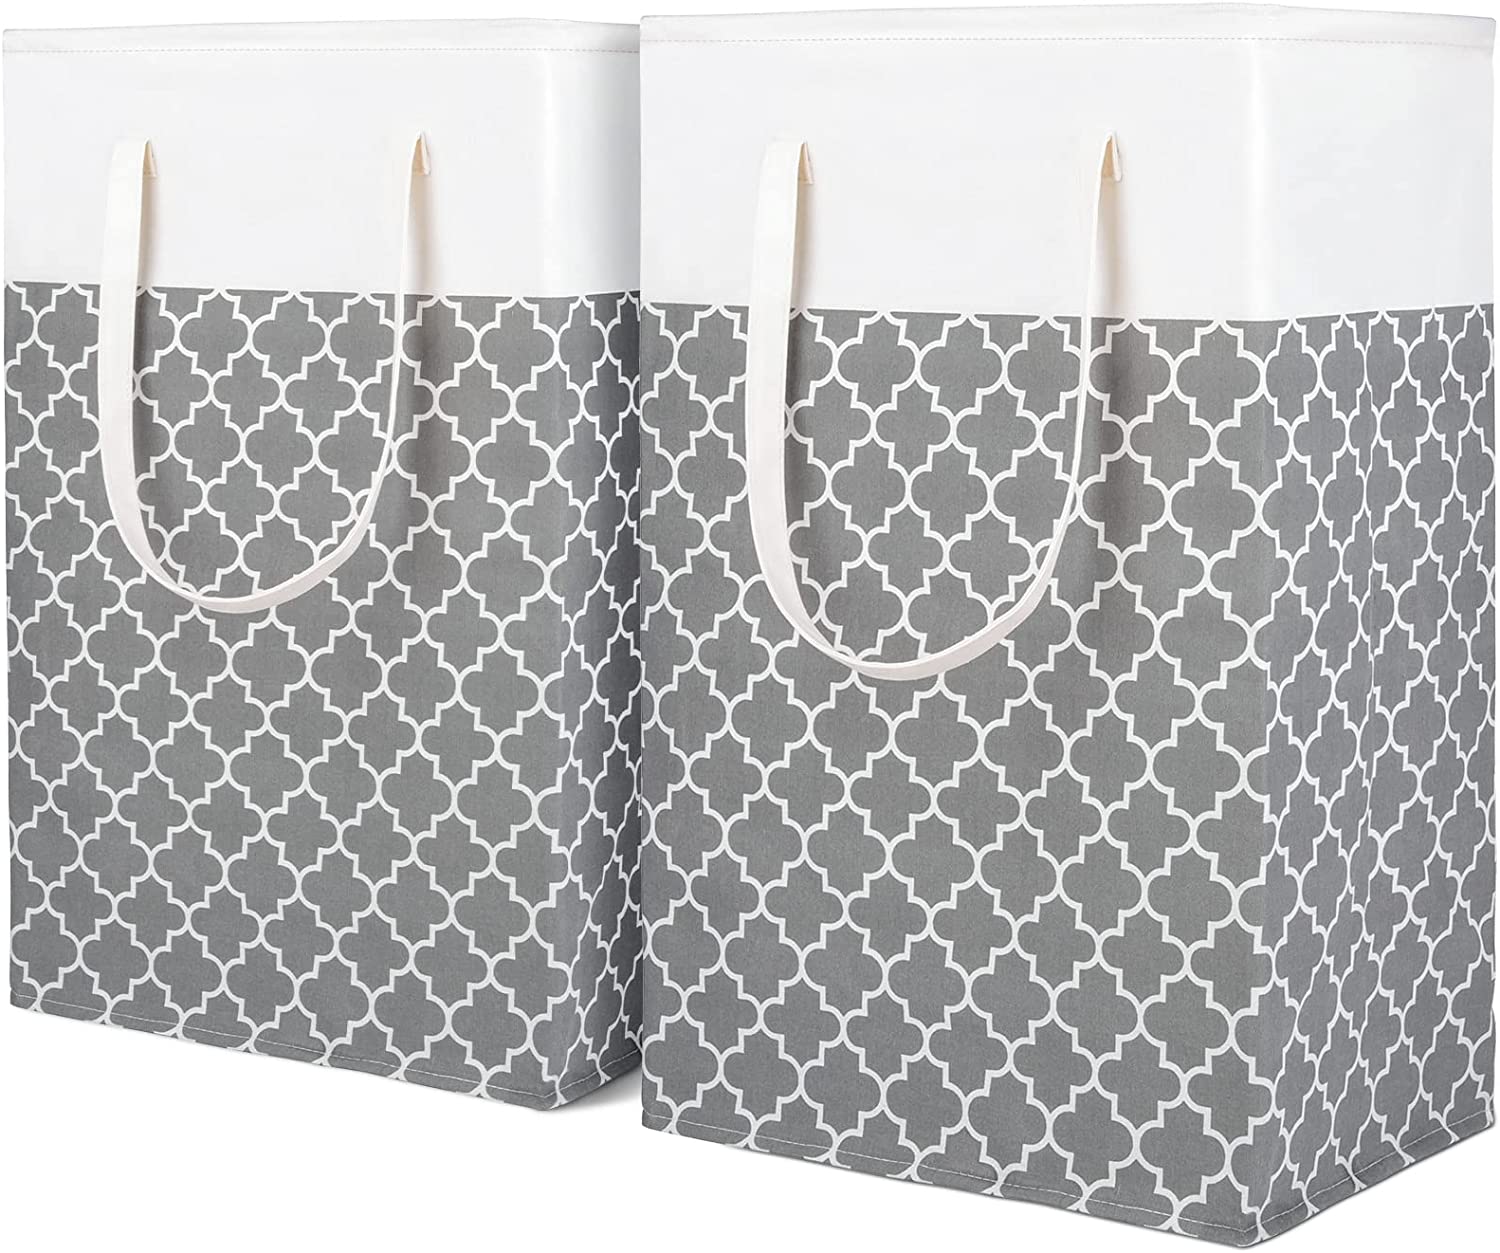 Laundry Basket 2 Packs, Laundry Hamper 75L with Easy Carry Handles Freestanding Graceland Home and Living